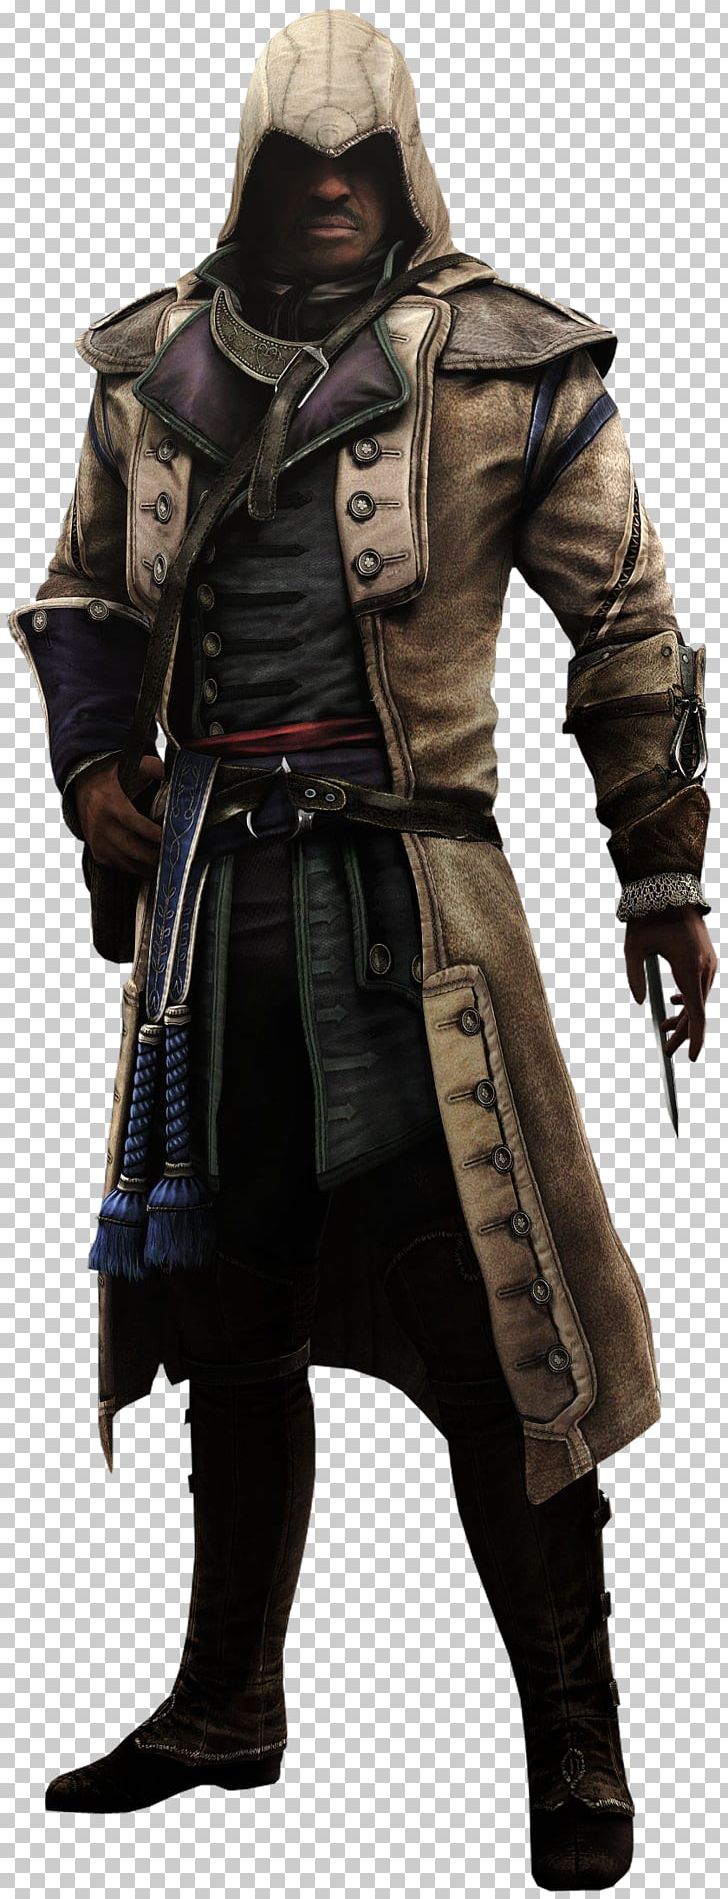 Assassin's Creed III Assassin's Creed Rogue Assassin's Creed Unity Assassin's Creed: Brotherhood PNG, Clipart, Achilles, Armour, Arno Dorian, Assassins, Assassins Creed Free PNG Download